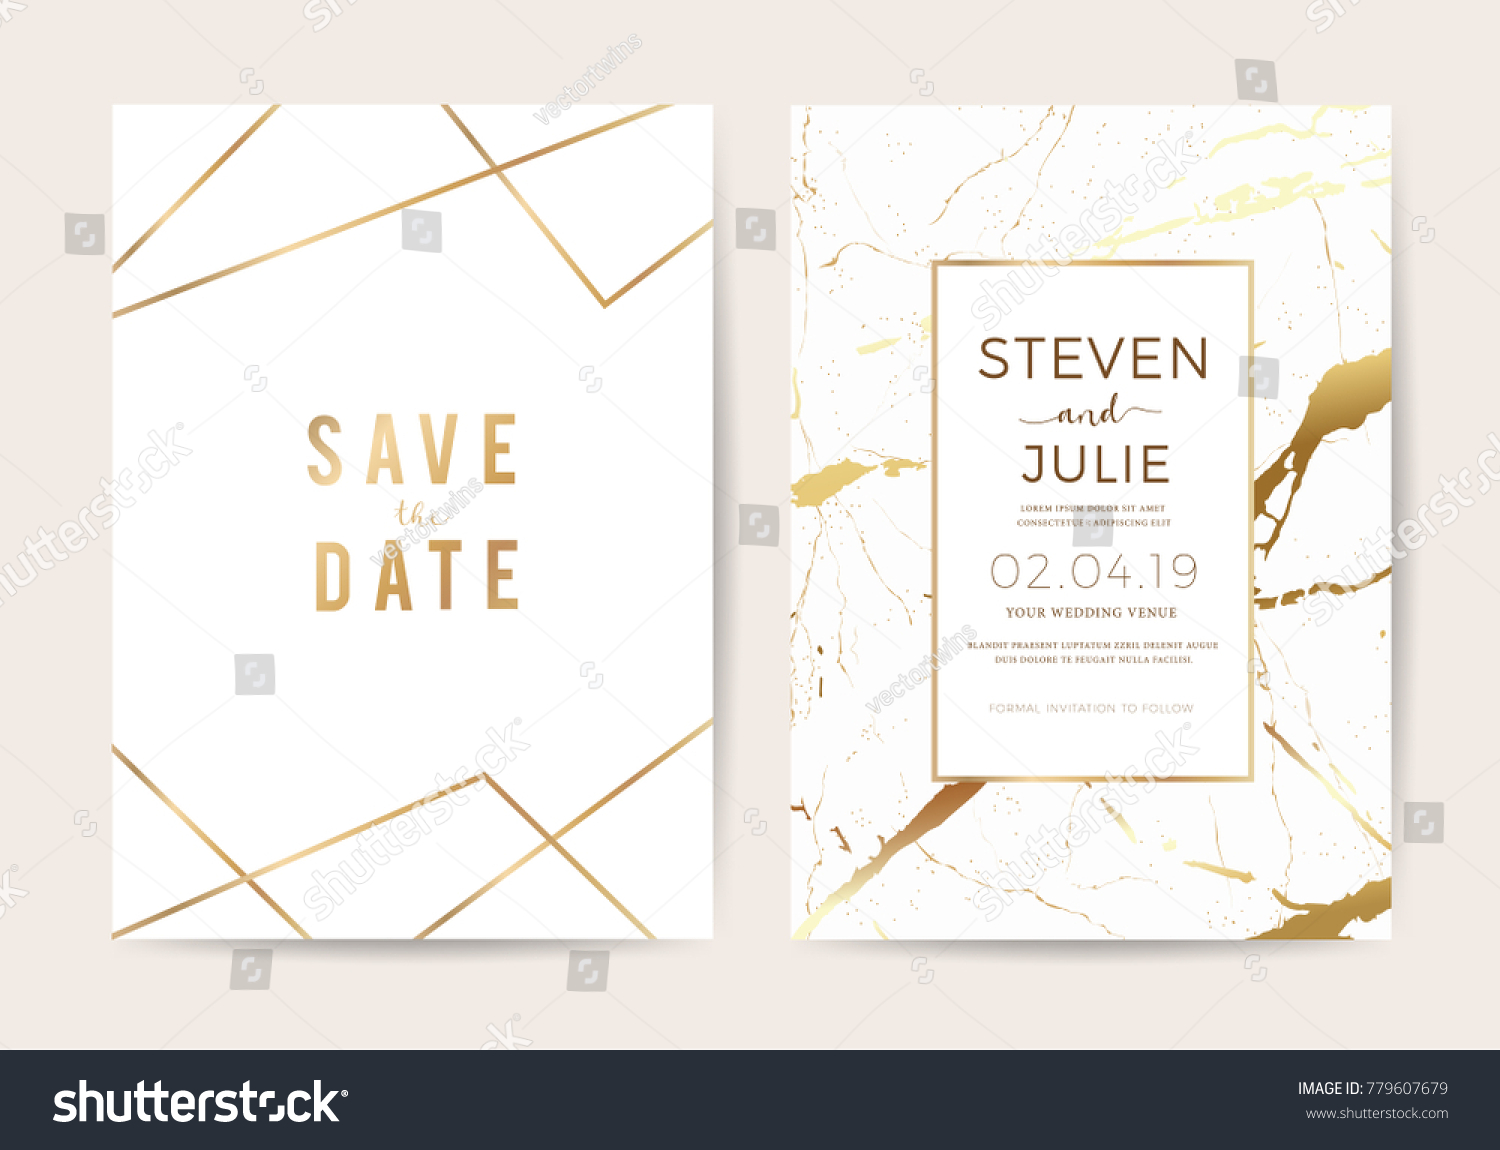 Luxury wedding invitation cards with gold marble texture and geometric pattern vector design template #779607679